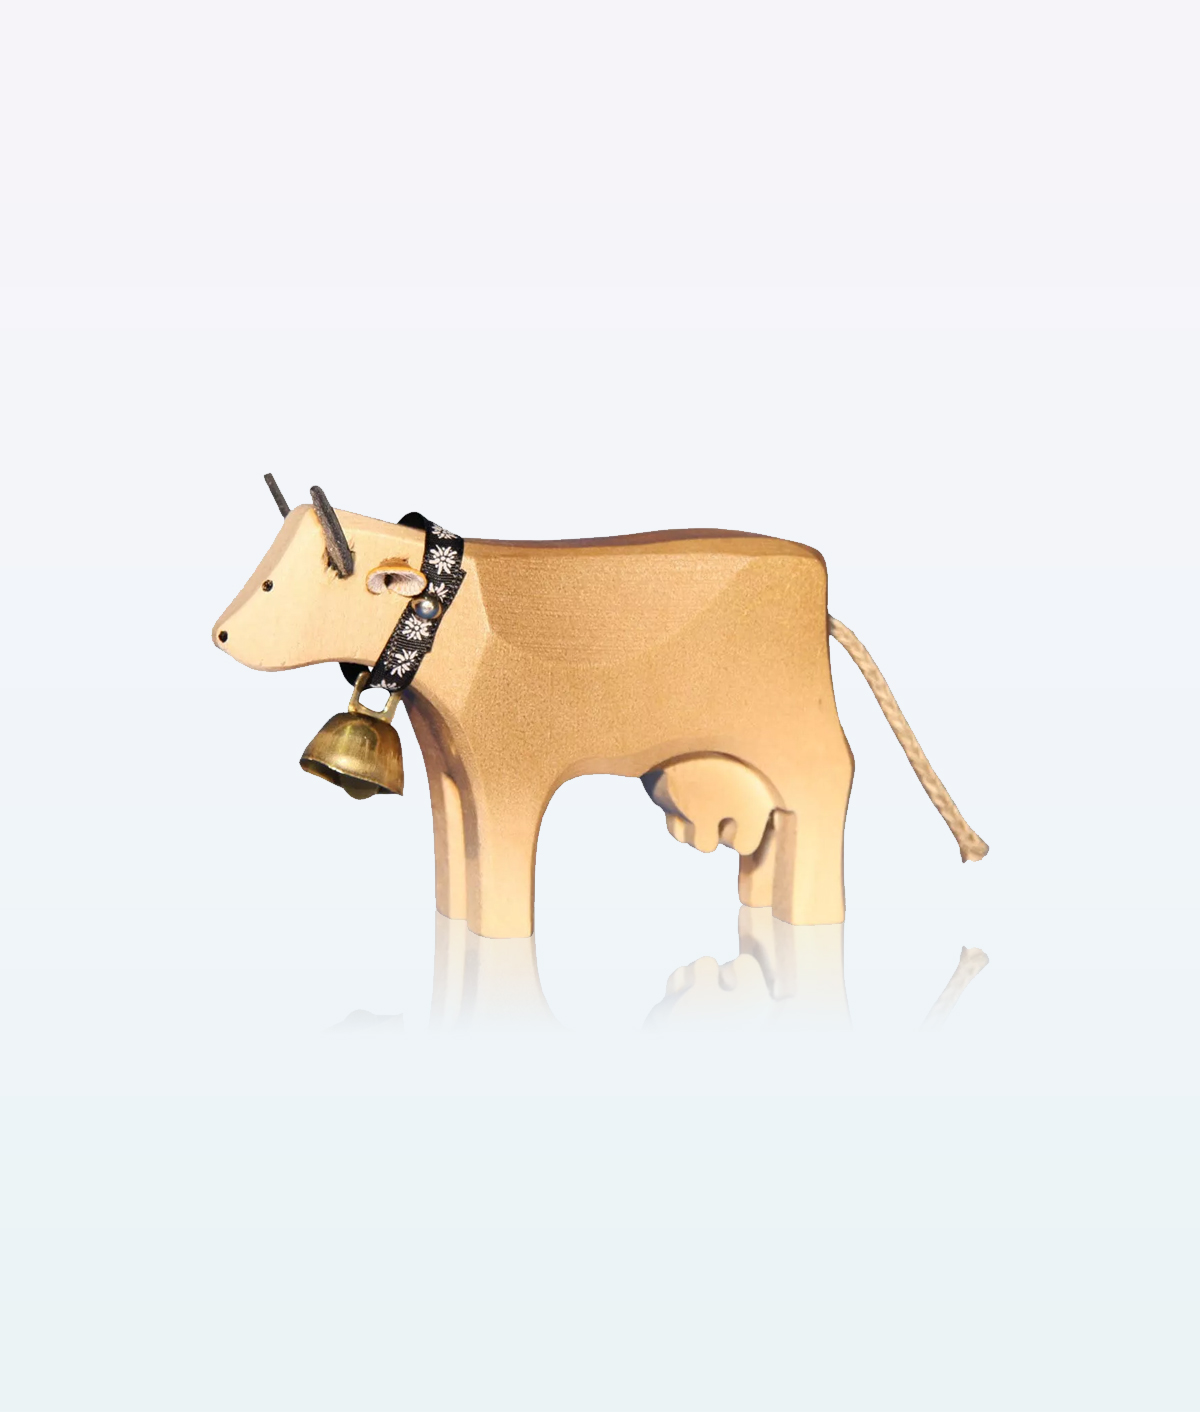 The Wooden Cow Trauffer toys